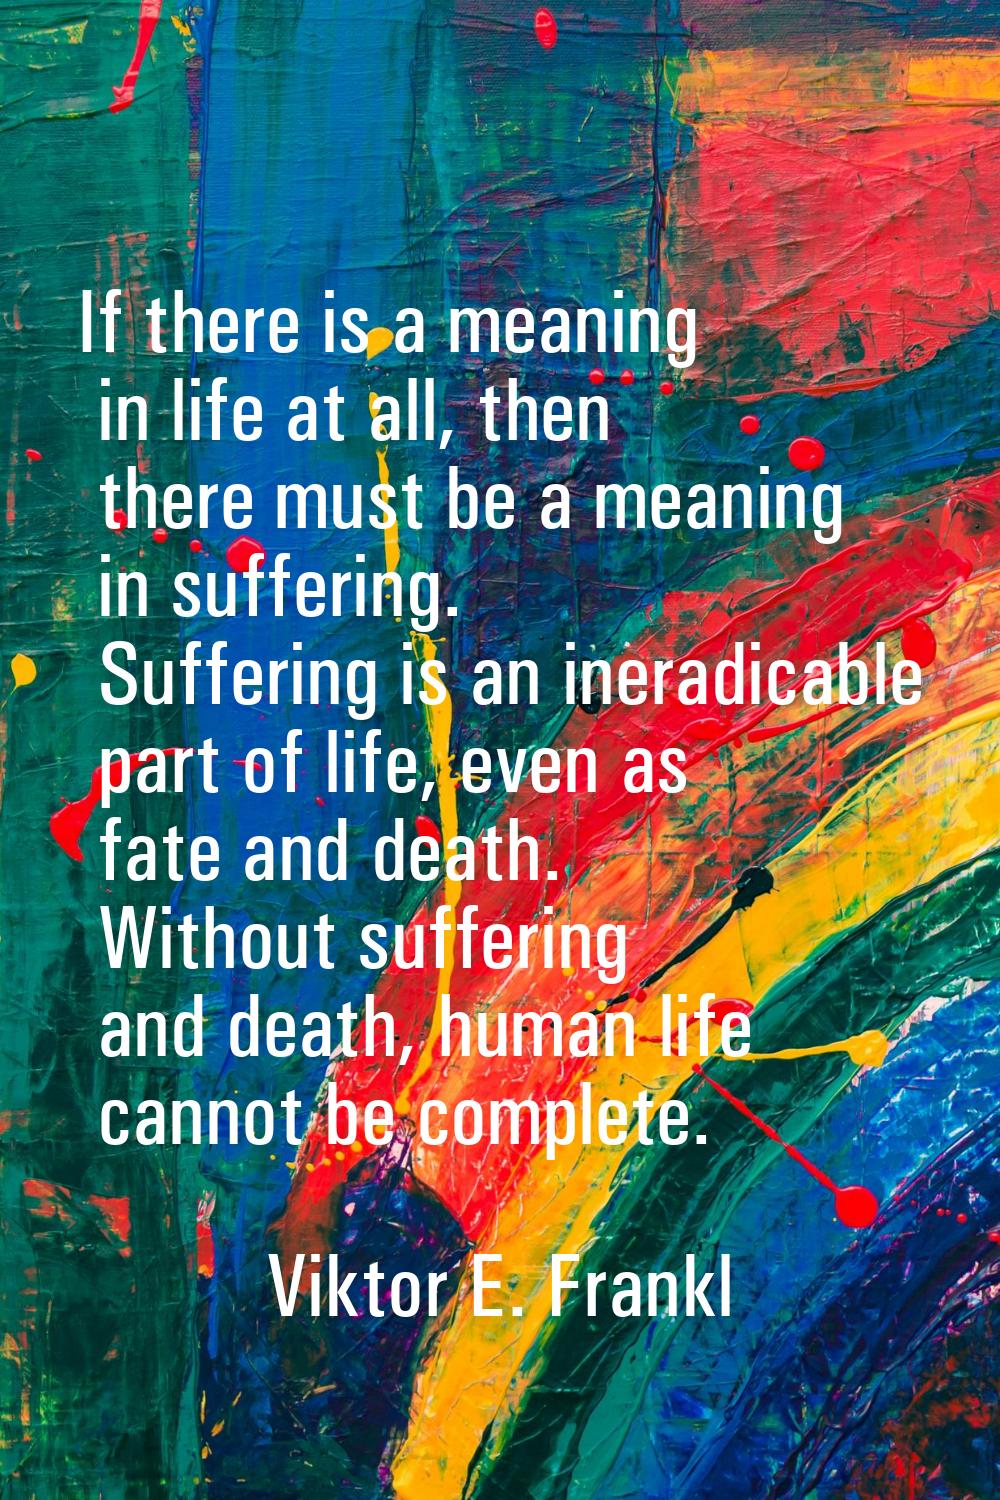 If there is a meaning in life at all, then there must be a meaning in suffering. Suffering is an in